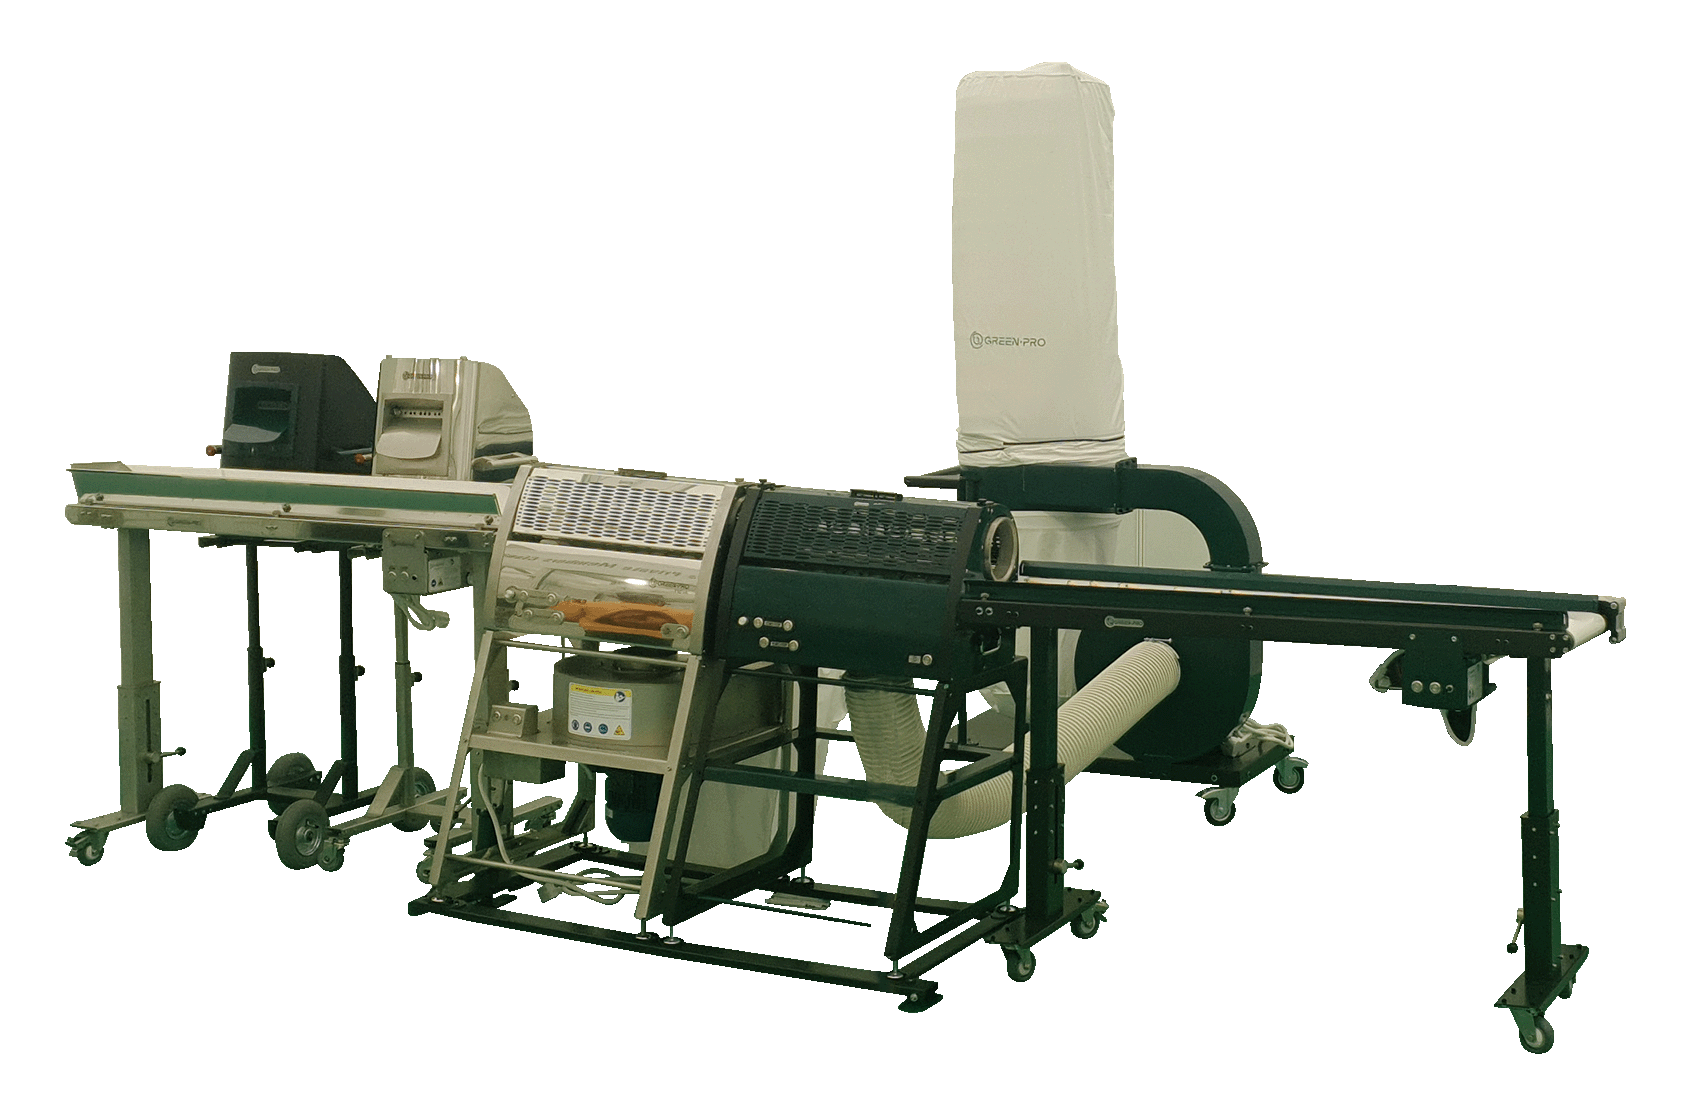 Green pro automated cannabis production machines